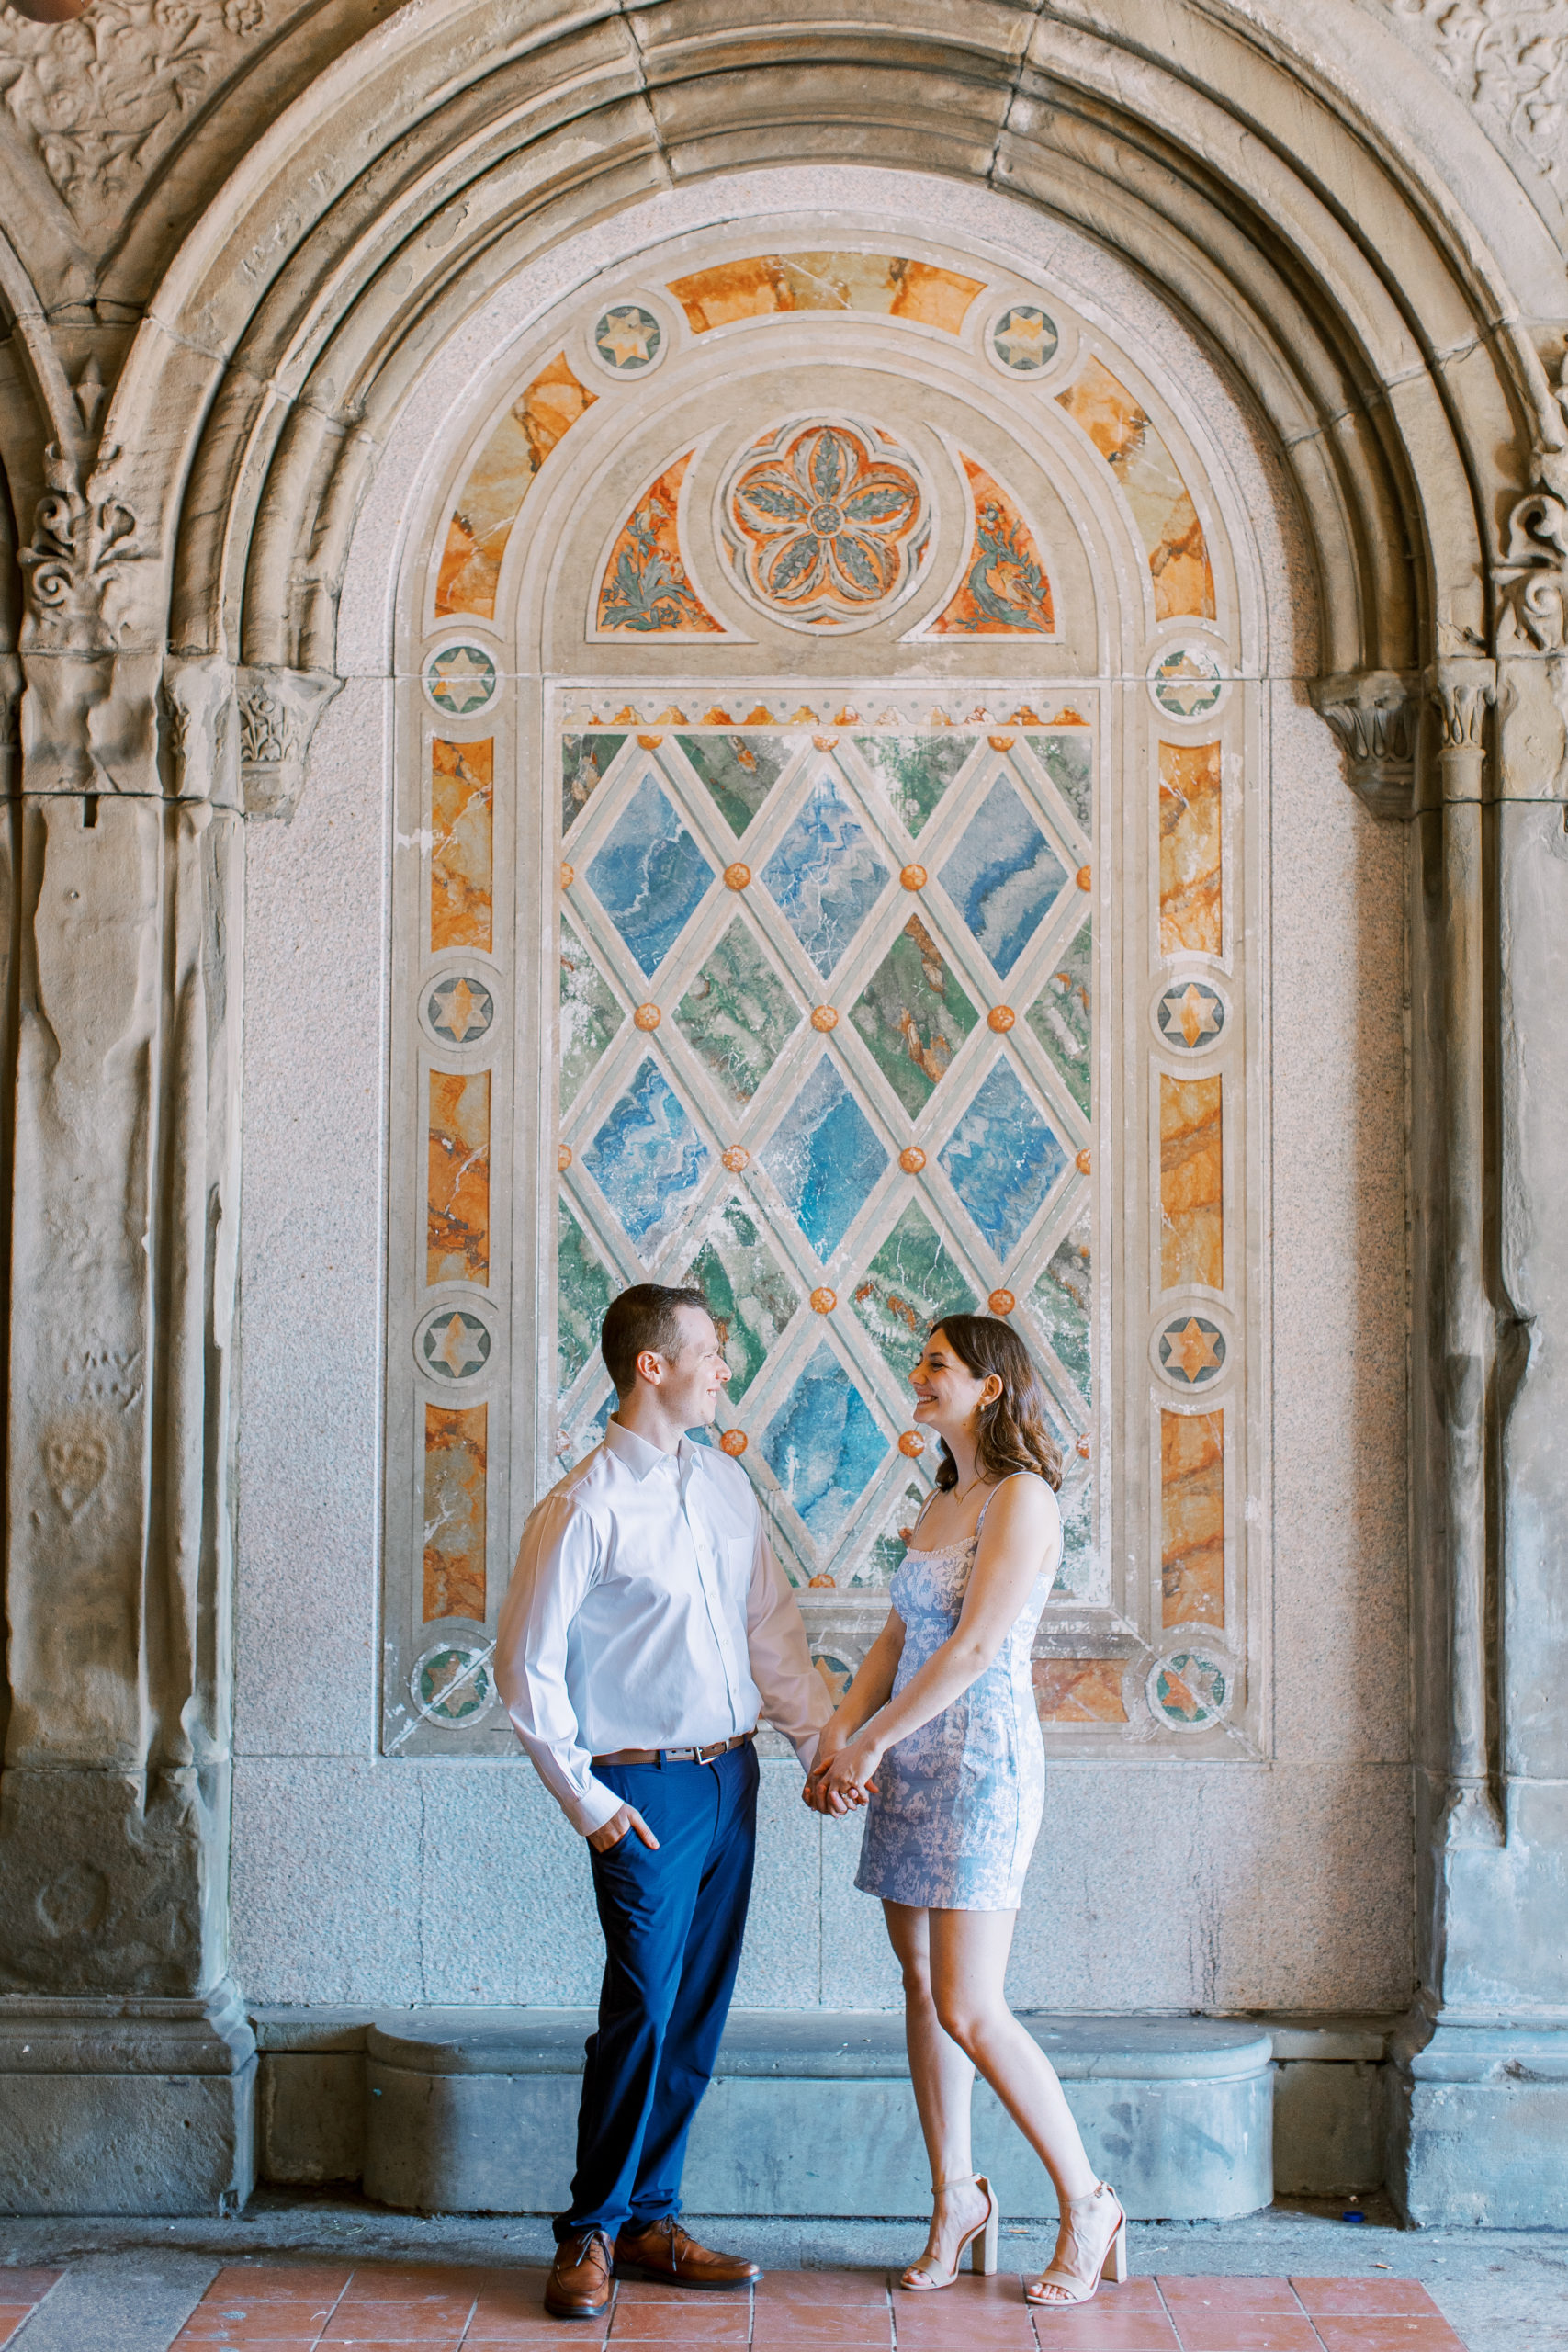 Couple holds hand and smiles in front of blue, green, and orange tiles inside terrace arcade for Central Park Engagement Photos